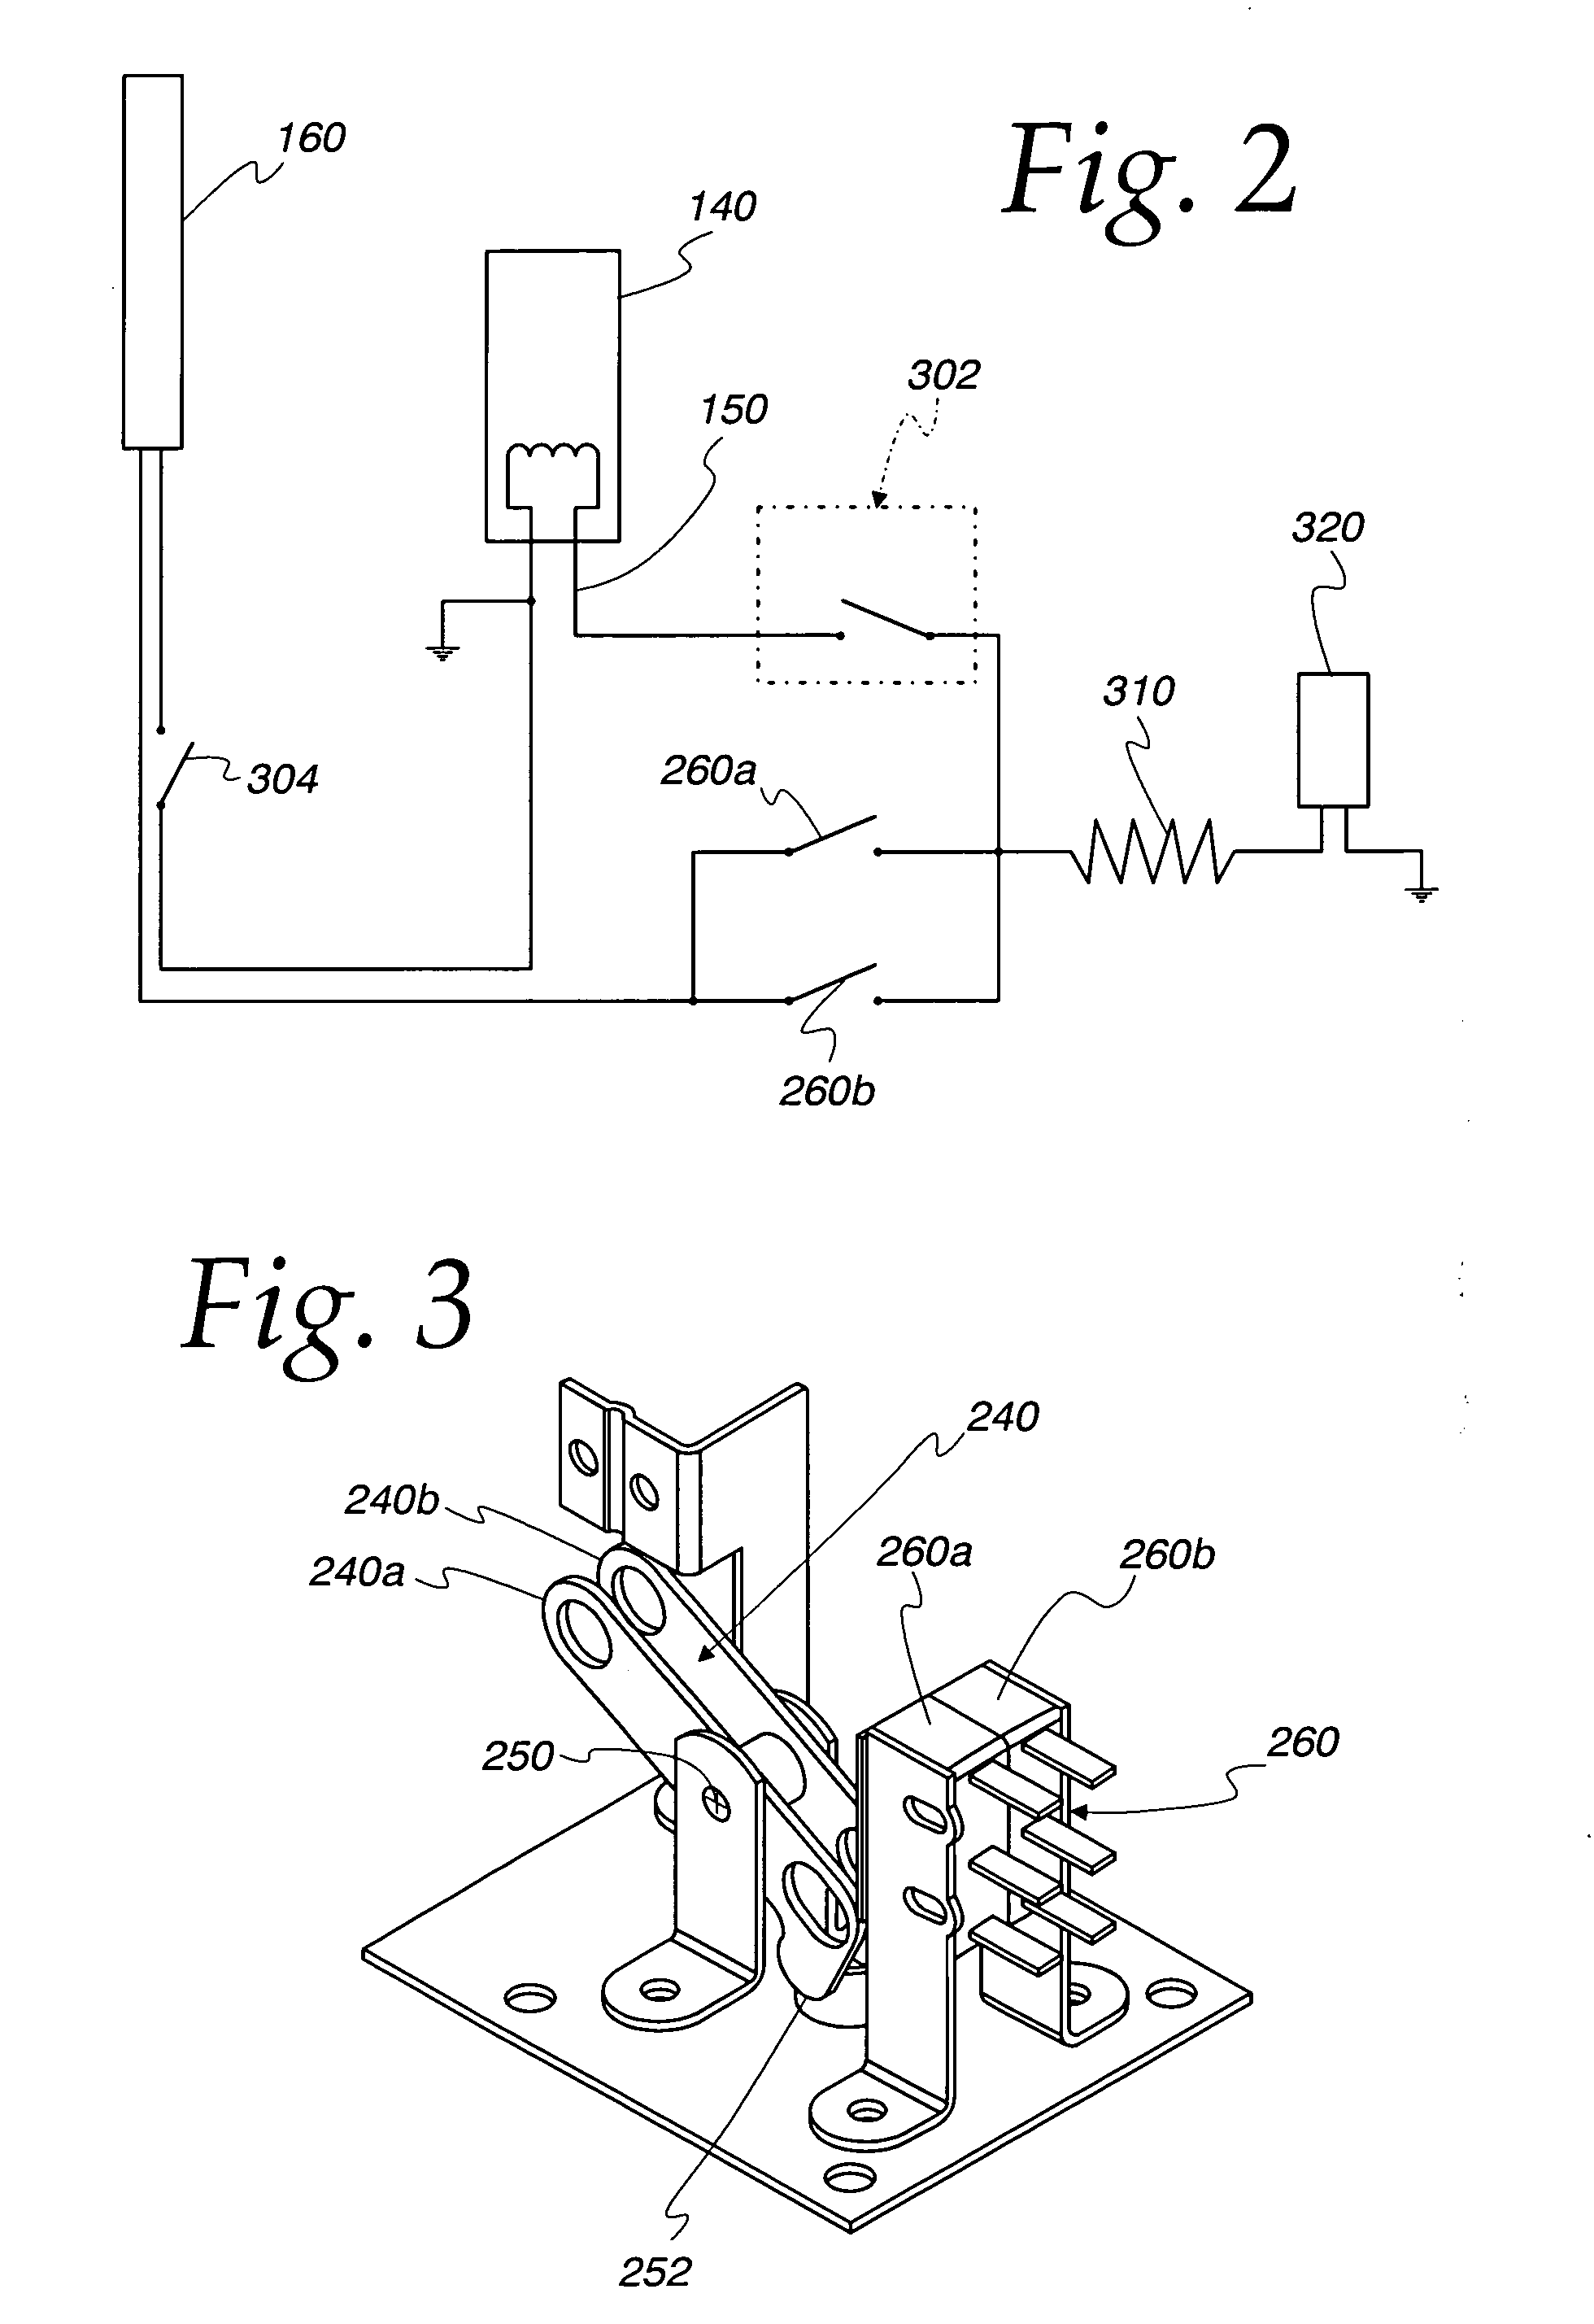 Apparatus and method for controlling a damper in a gas-fired appliance